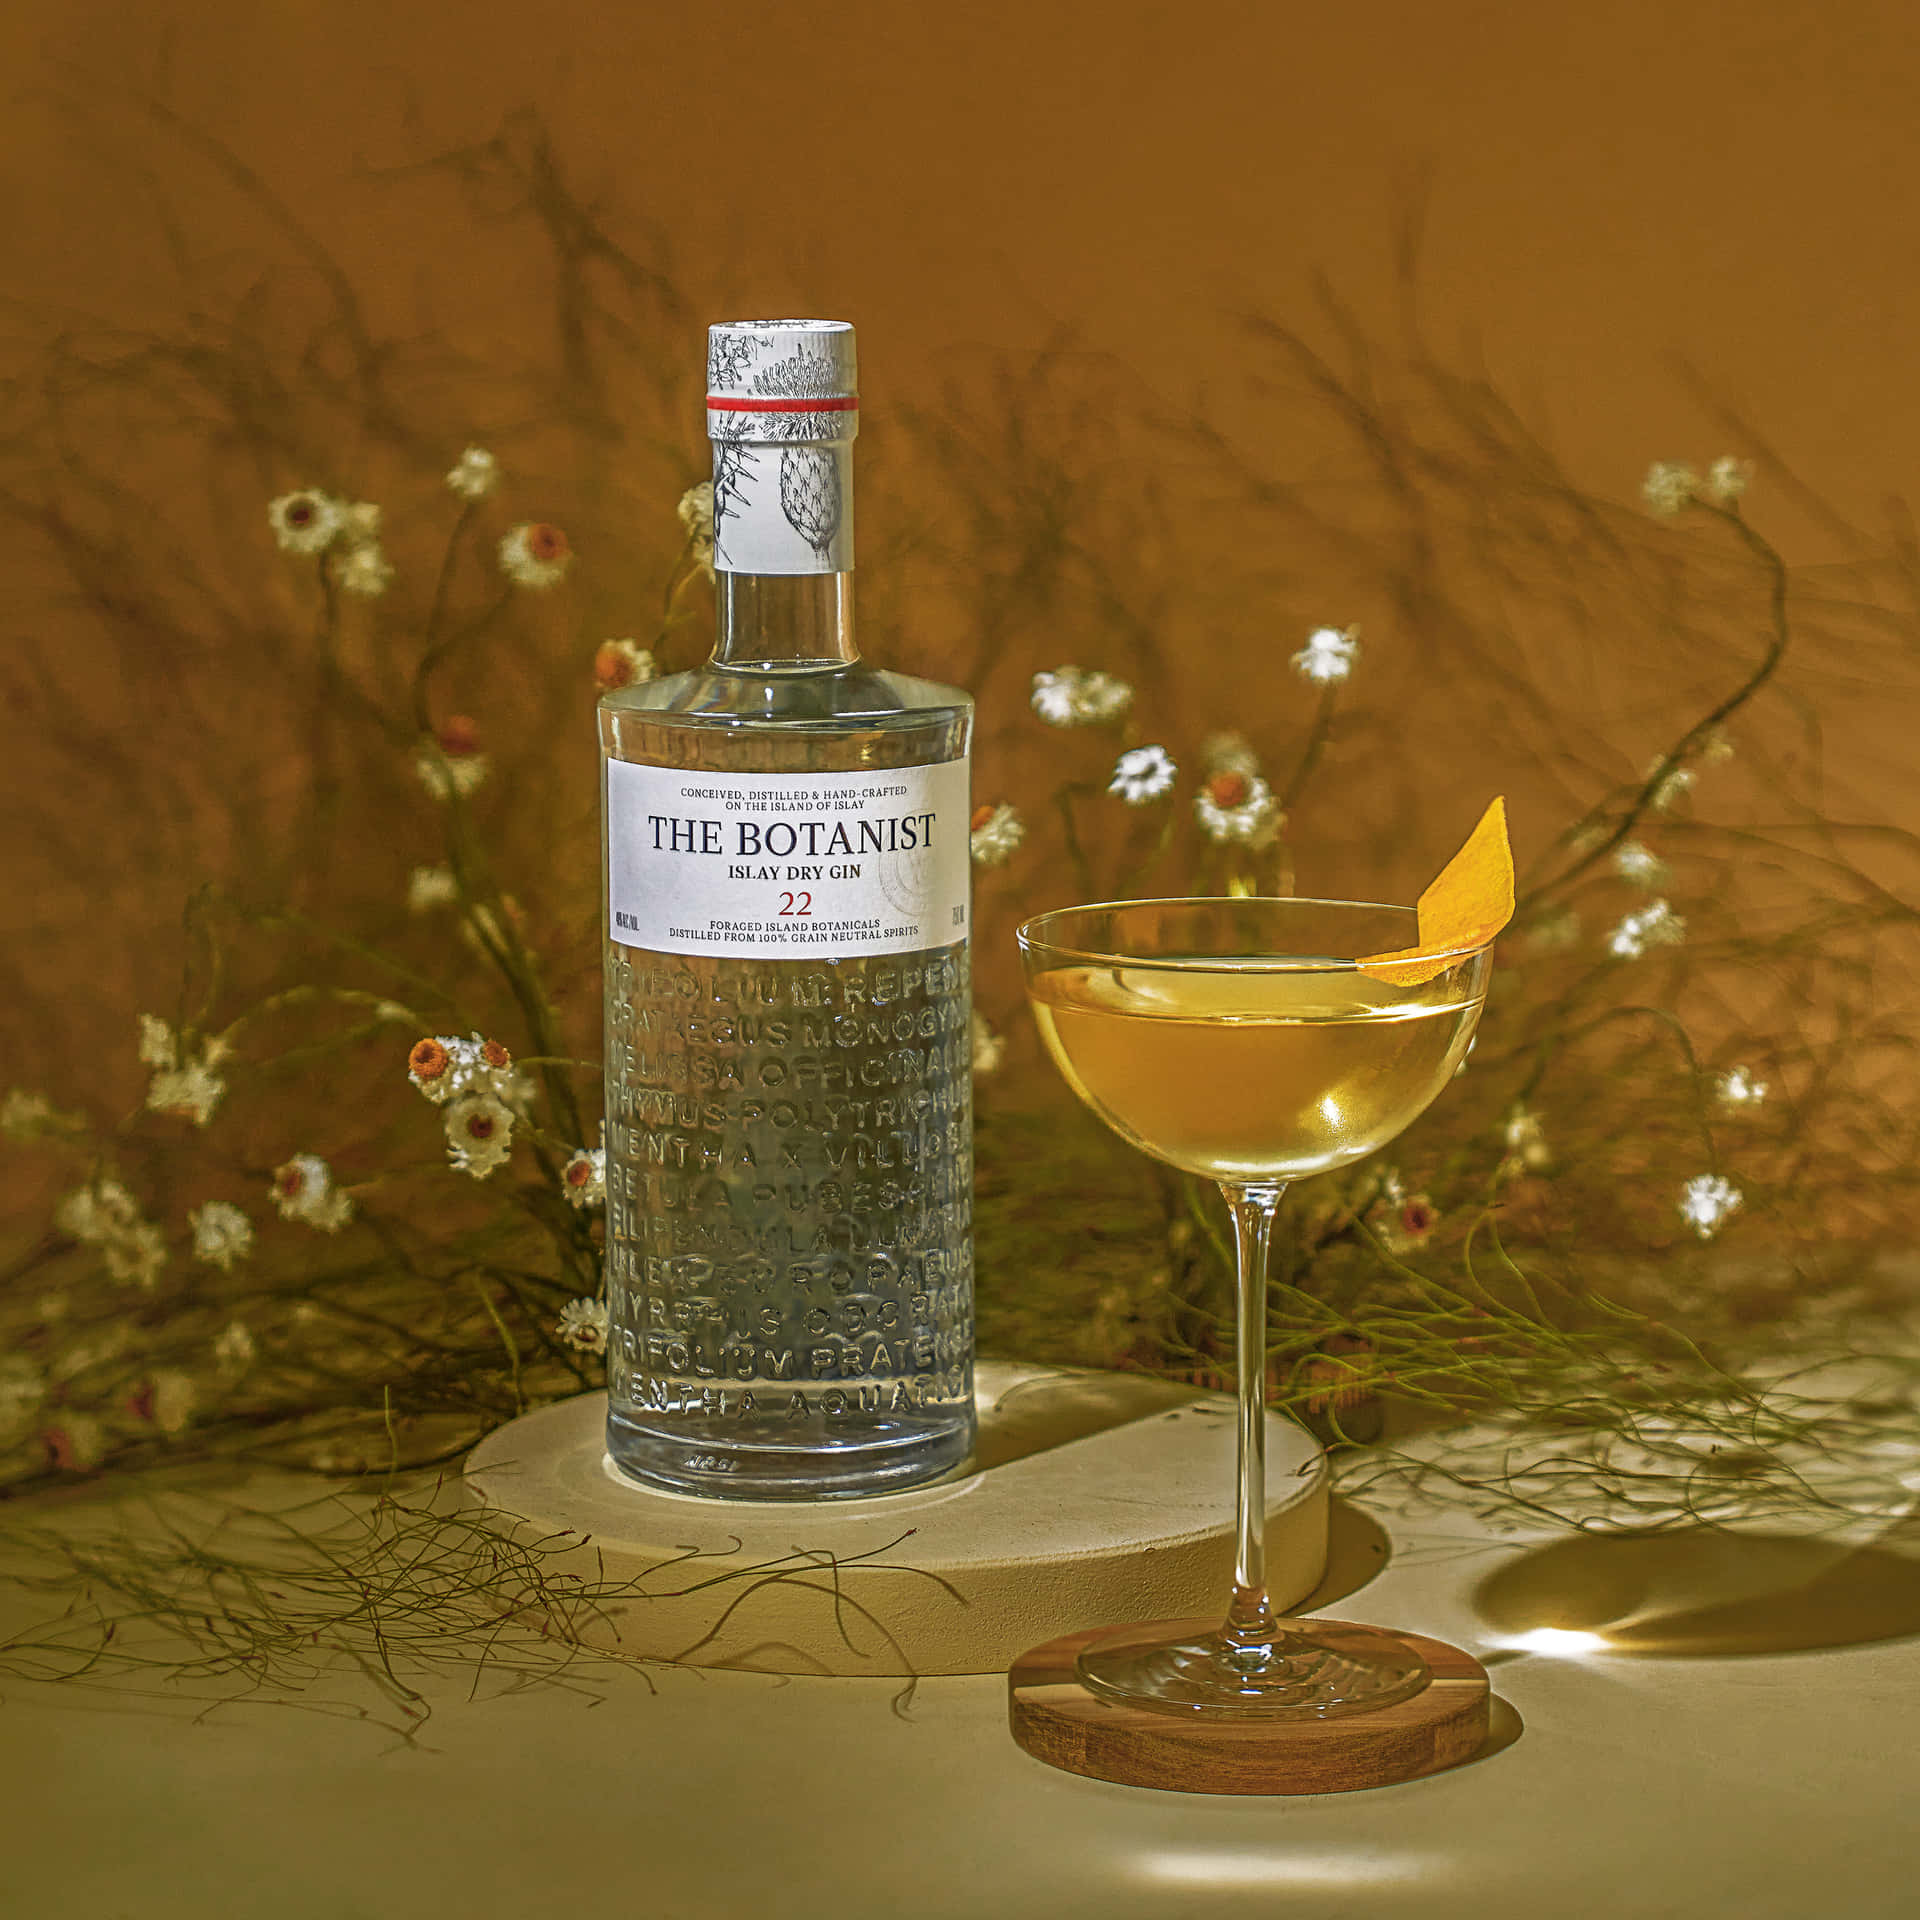 The Botanist Islay Dry Gin Cocktail And Flowers Wallpaper